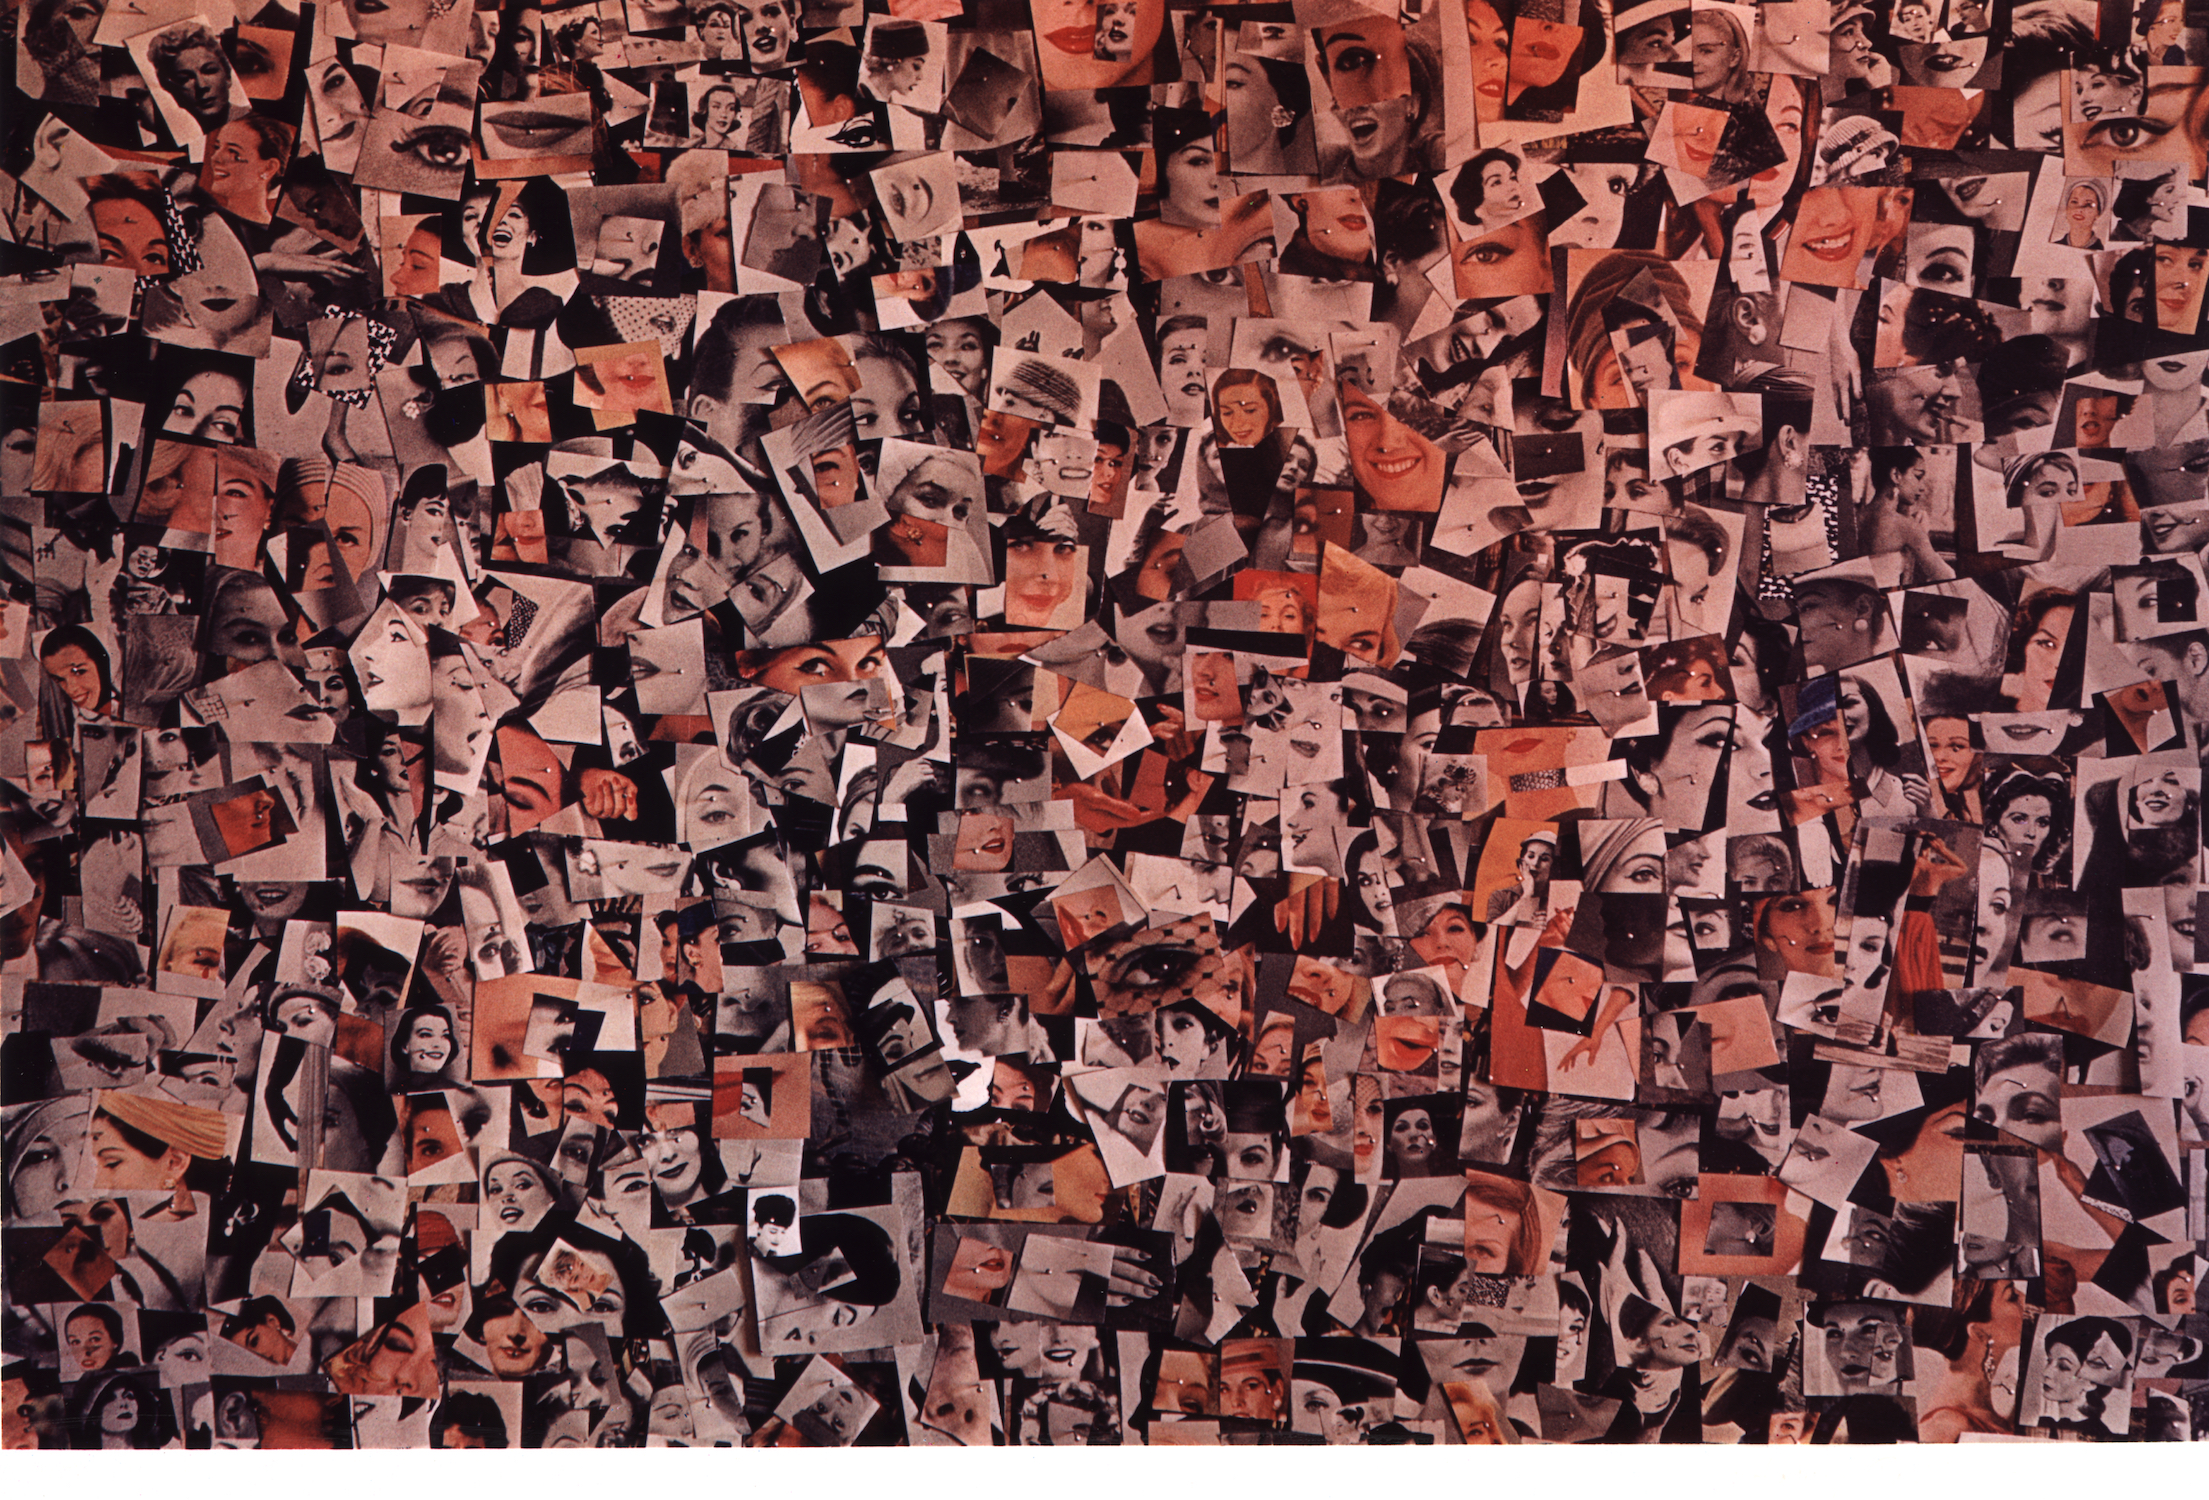 Harry Callahan, Collages, ca. 1957. International Center of Photography, Gift of Louis F. Fox, 1980. © The Estate of Harry Callahan, courtesy Pace Gallery